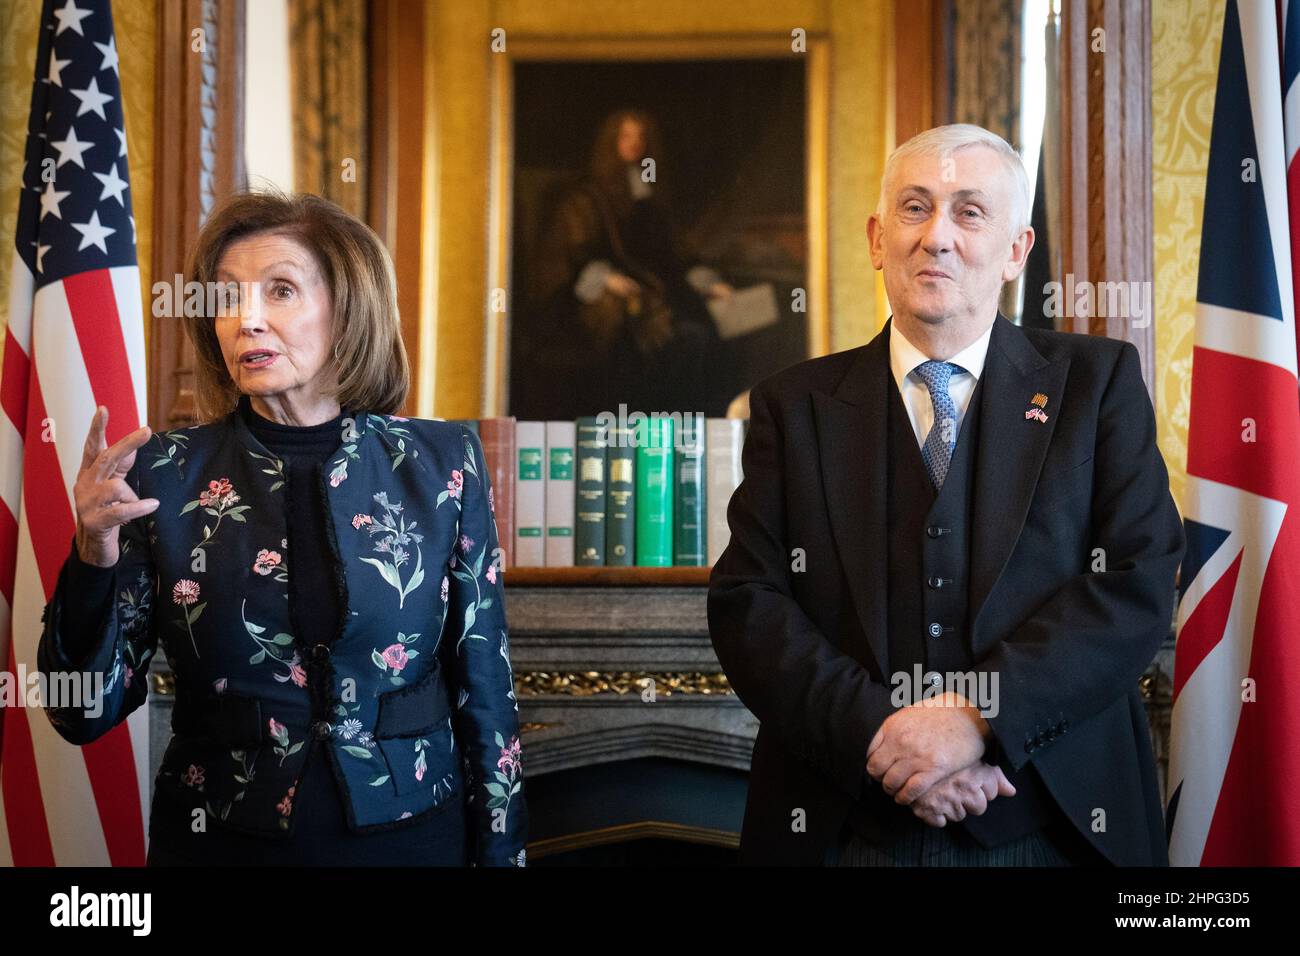 Speaker of the House of Commons Sir Lindsay Hoyle and Nancy Pelosi, Speaker of the House of Representatives in the United States answer questions from the media during her visit as his guest to the Houses of Parliament in Westminster, London. Picture date: Monday February 21, 2022. Stock Photo